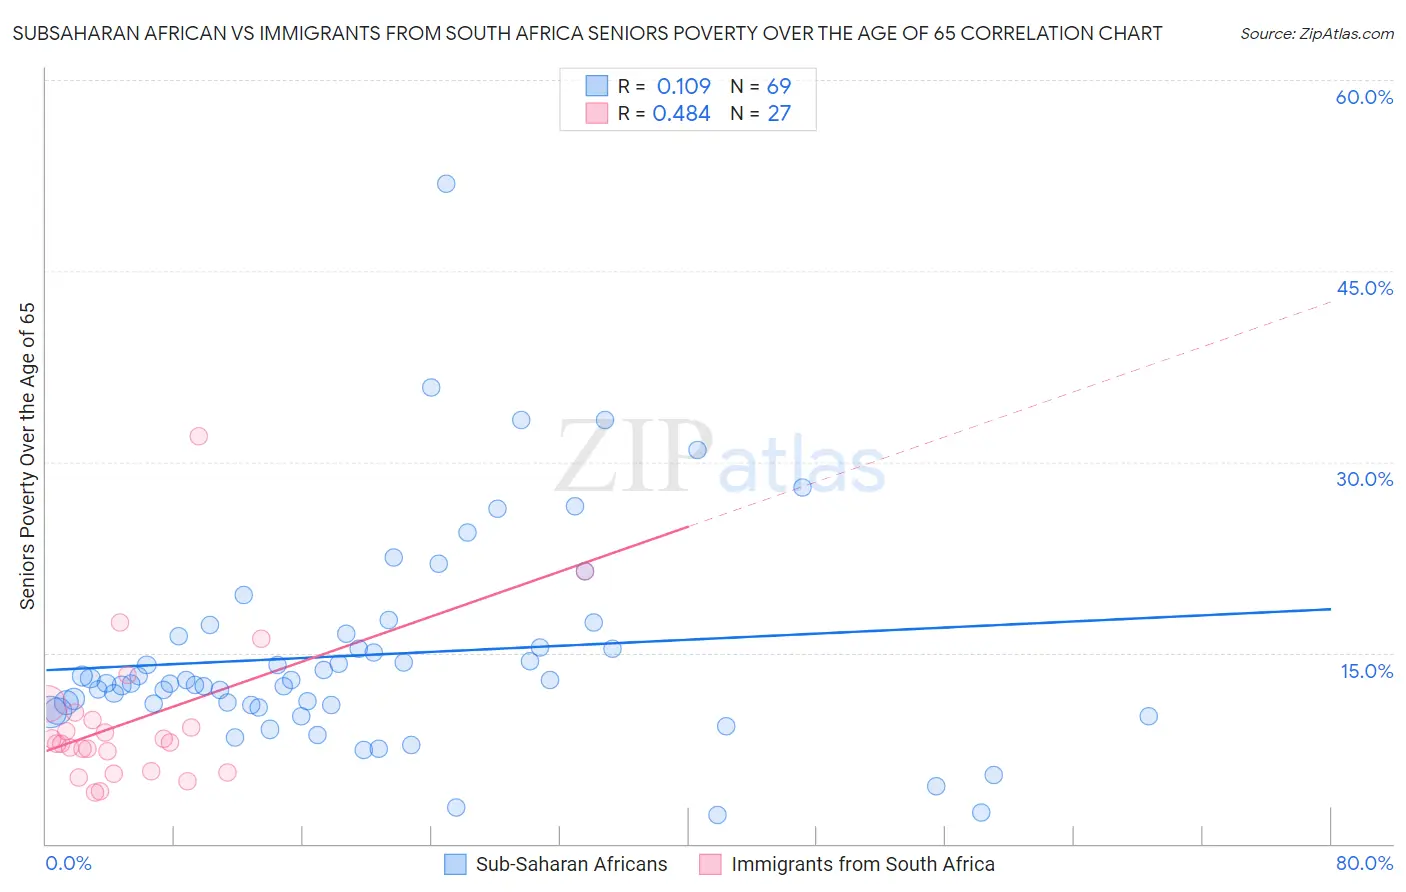 Subsaharan African vs Immigrants from South Africa Seniors Poverty Over the Age of 65